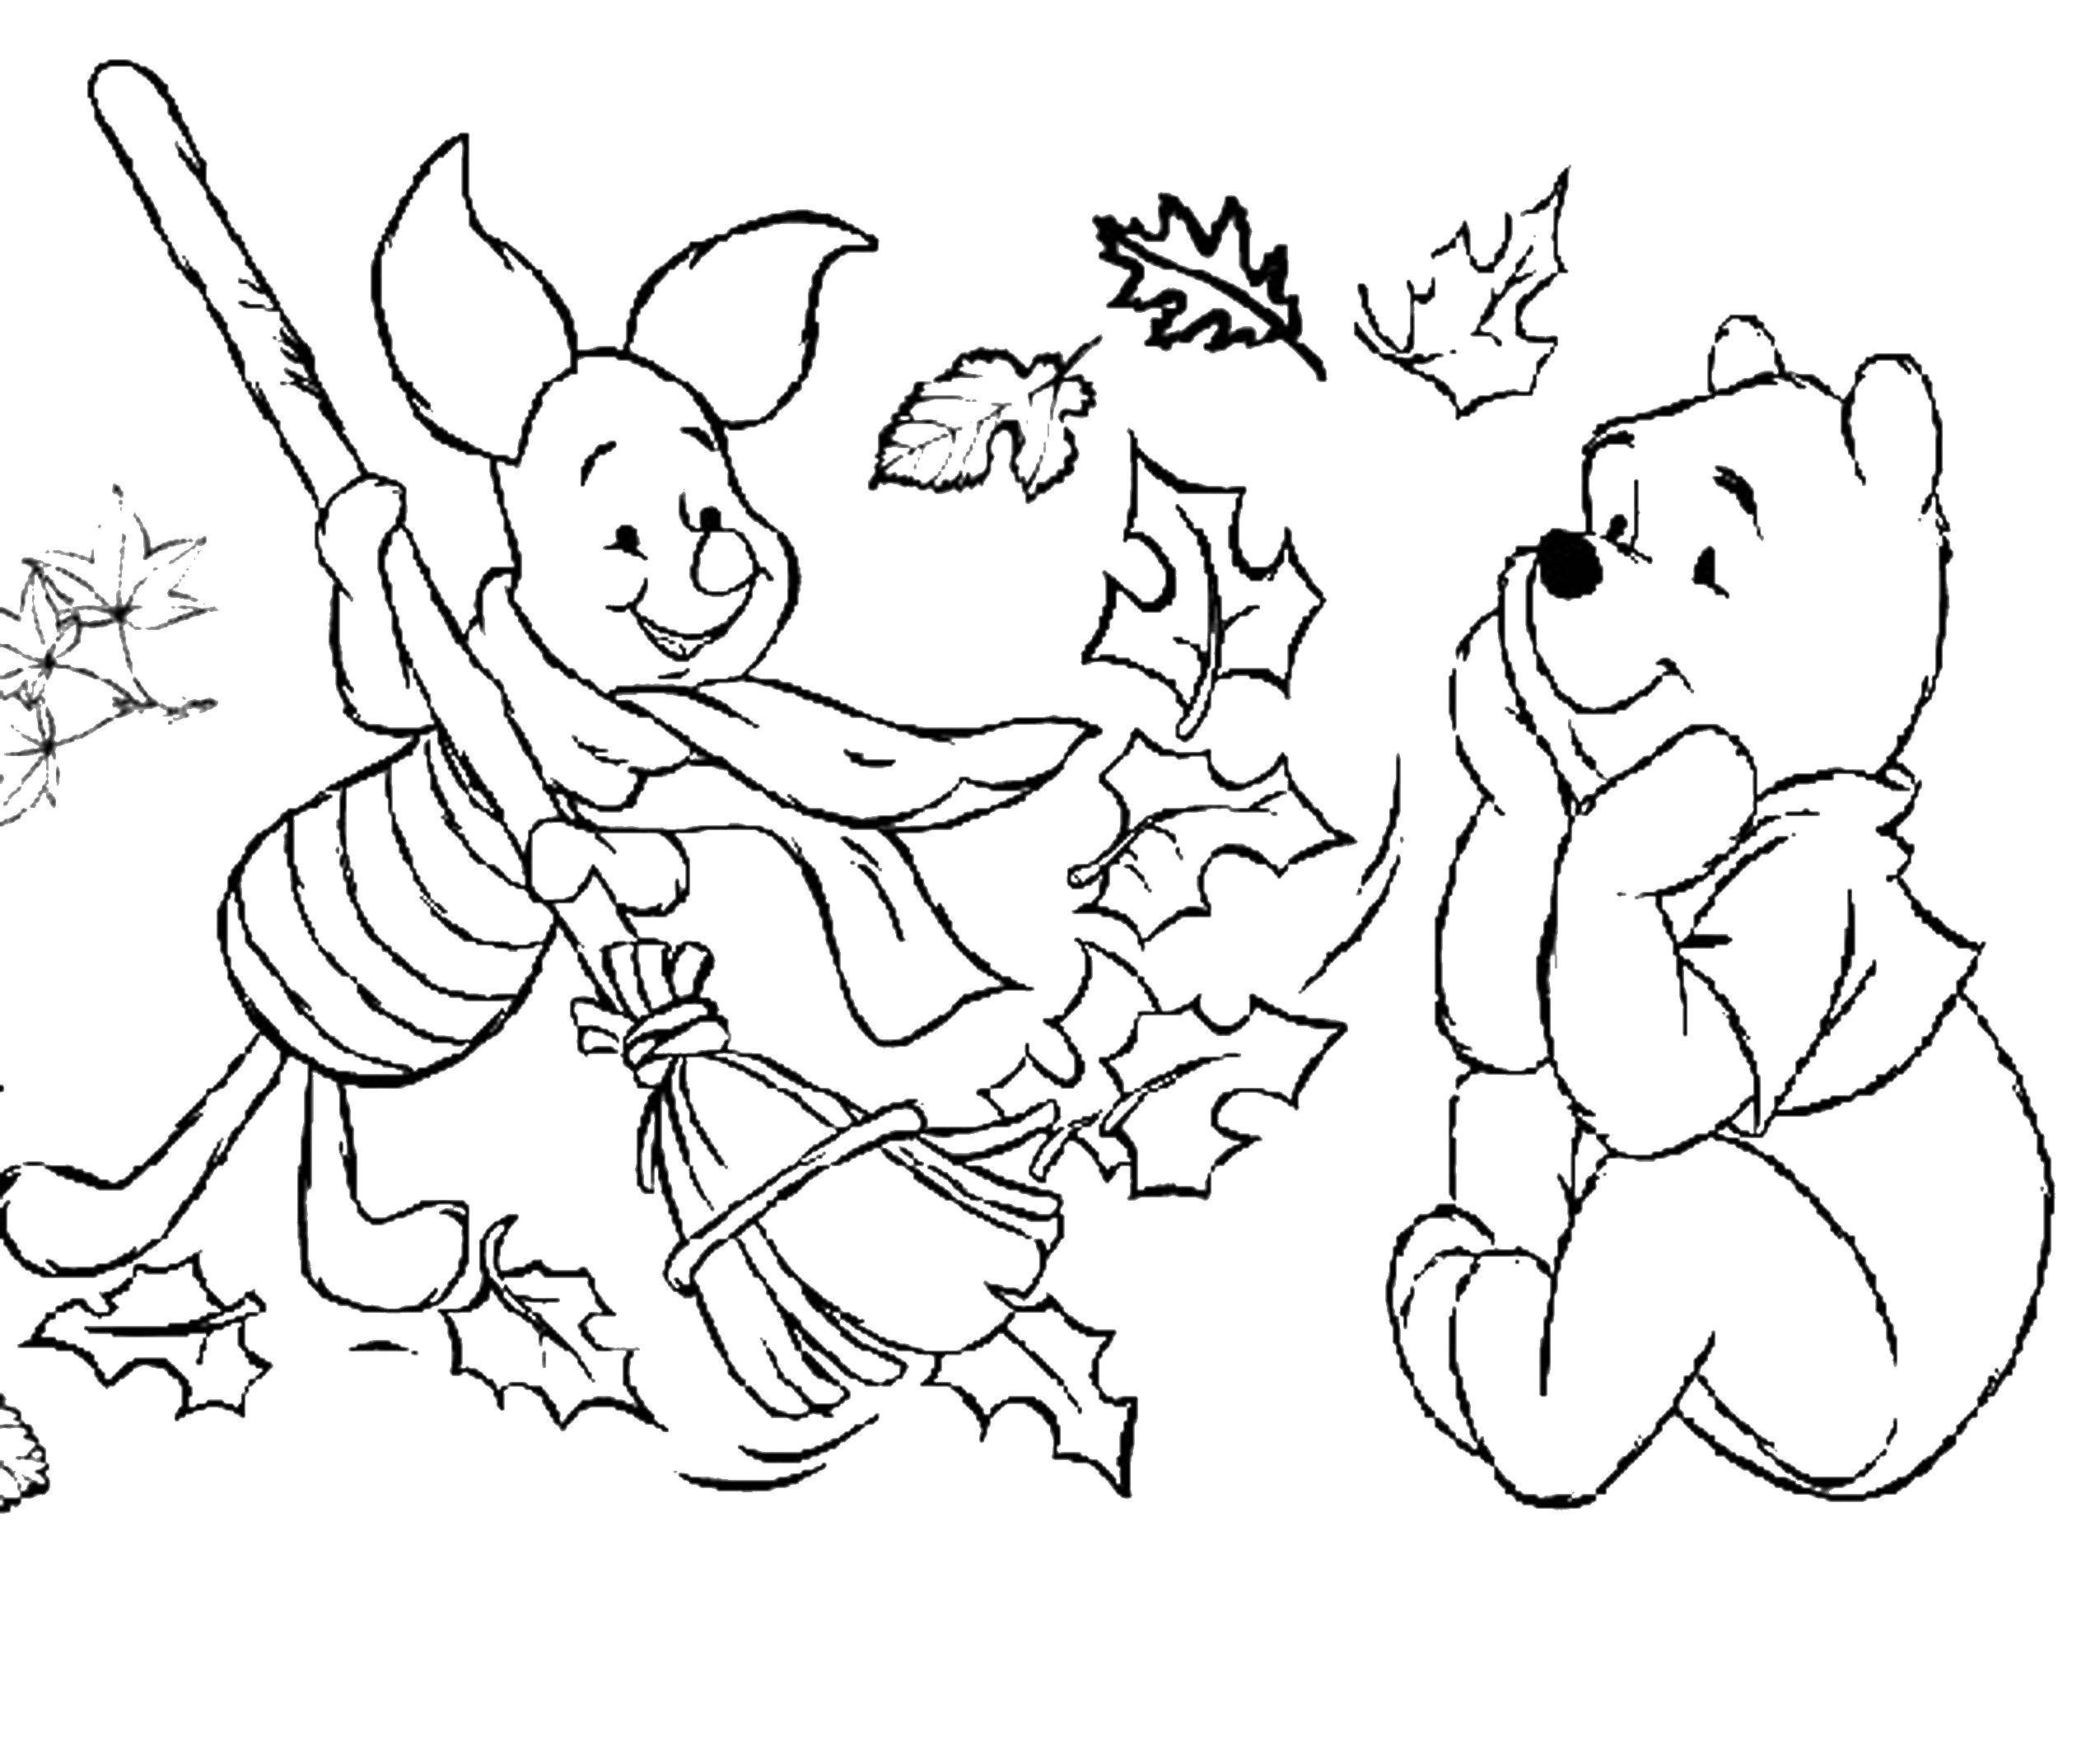 Coloring Winnie the Pooh and Piglet clean sheets. Category Autumn. Tags:  Autumn, leaves.